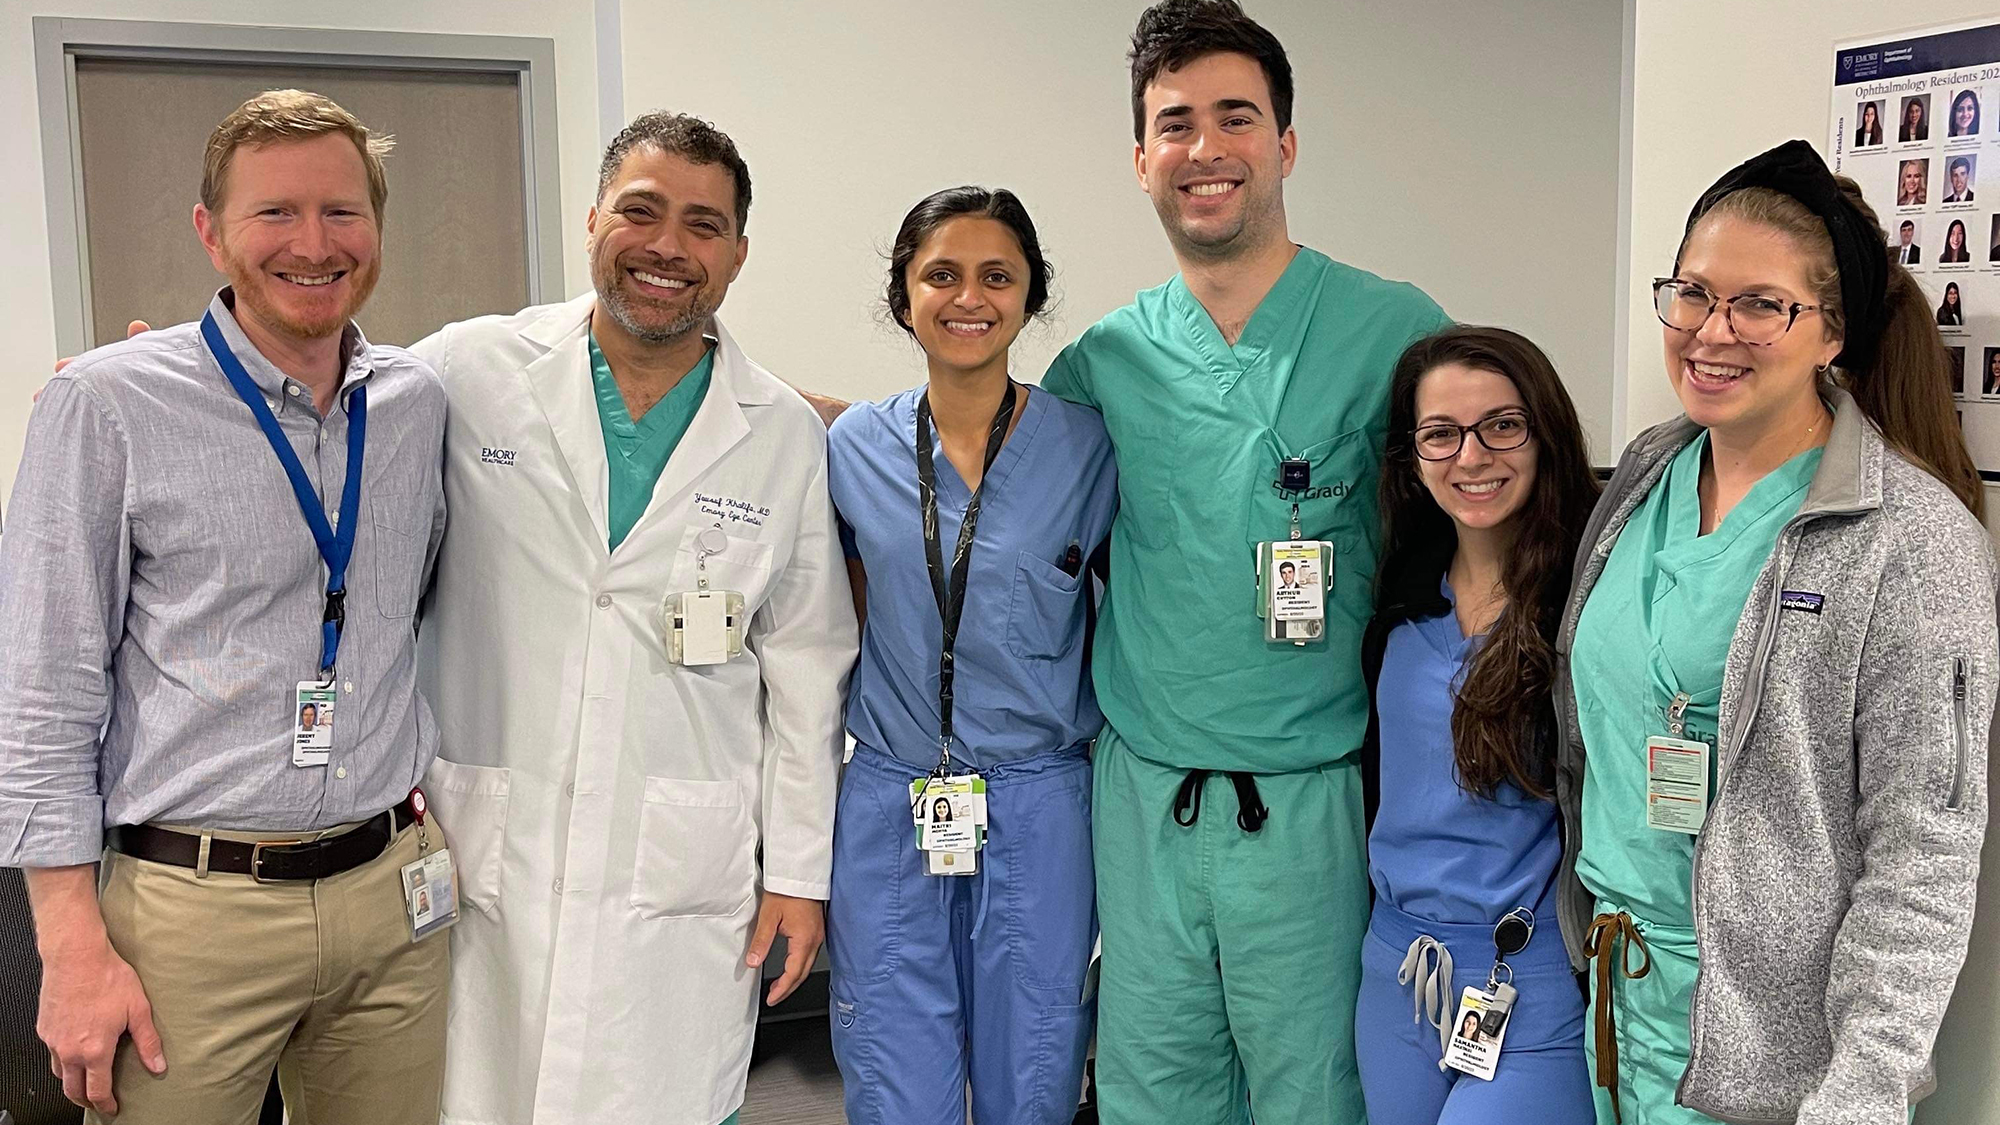 a group photo of faculty clinicians and fourth-year residents arm-in-arm after exiting from surgery for the day